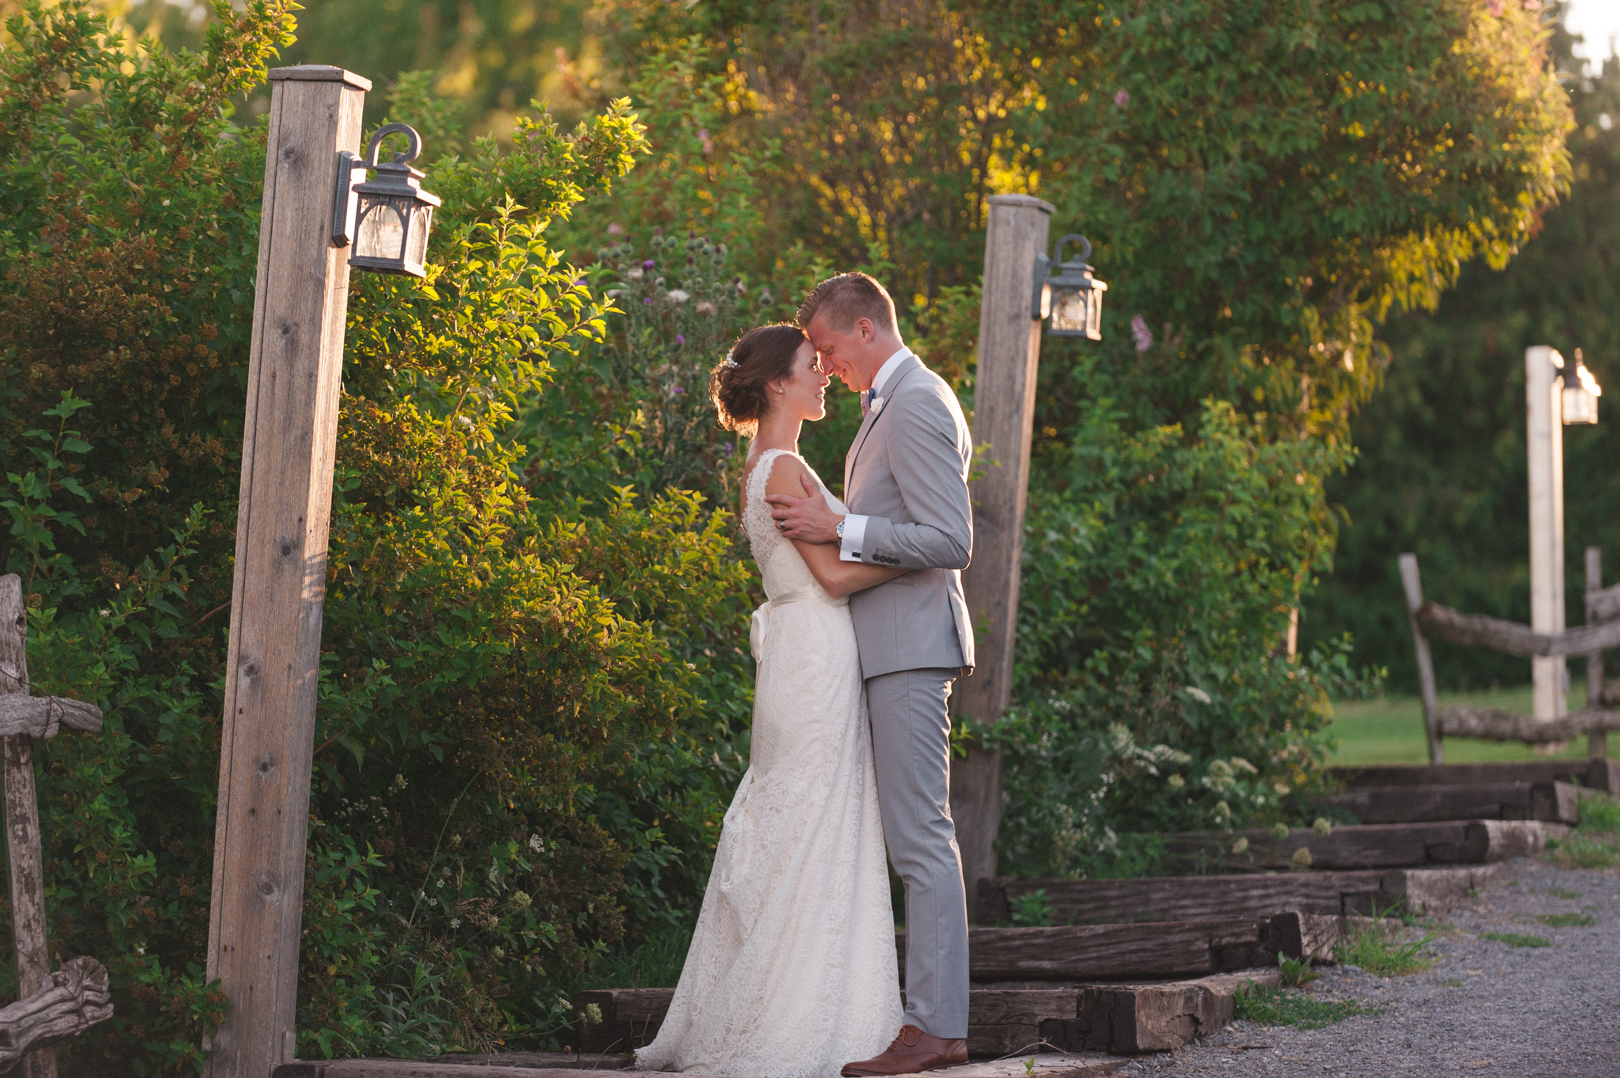 sunset photos of bride and groom at Strathmere in Ottawa, Ontario